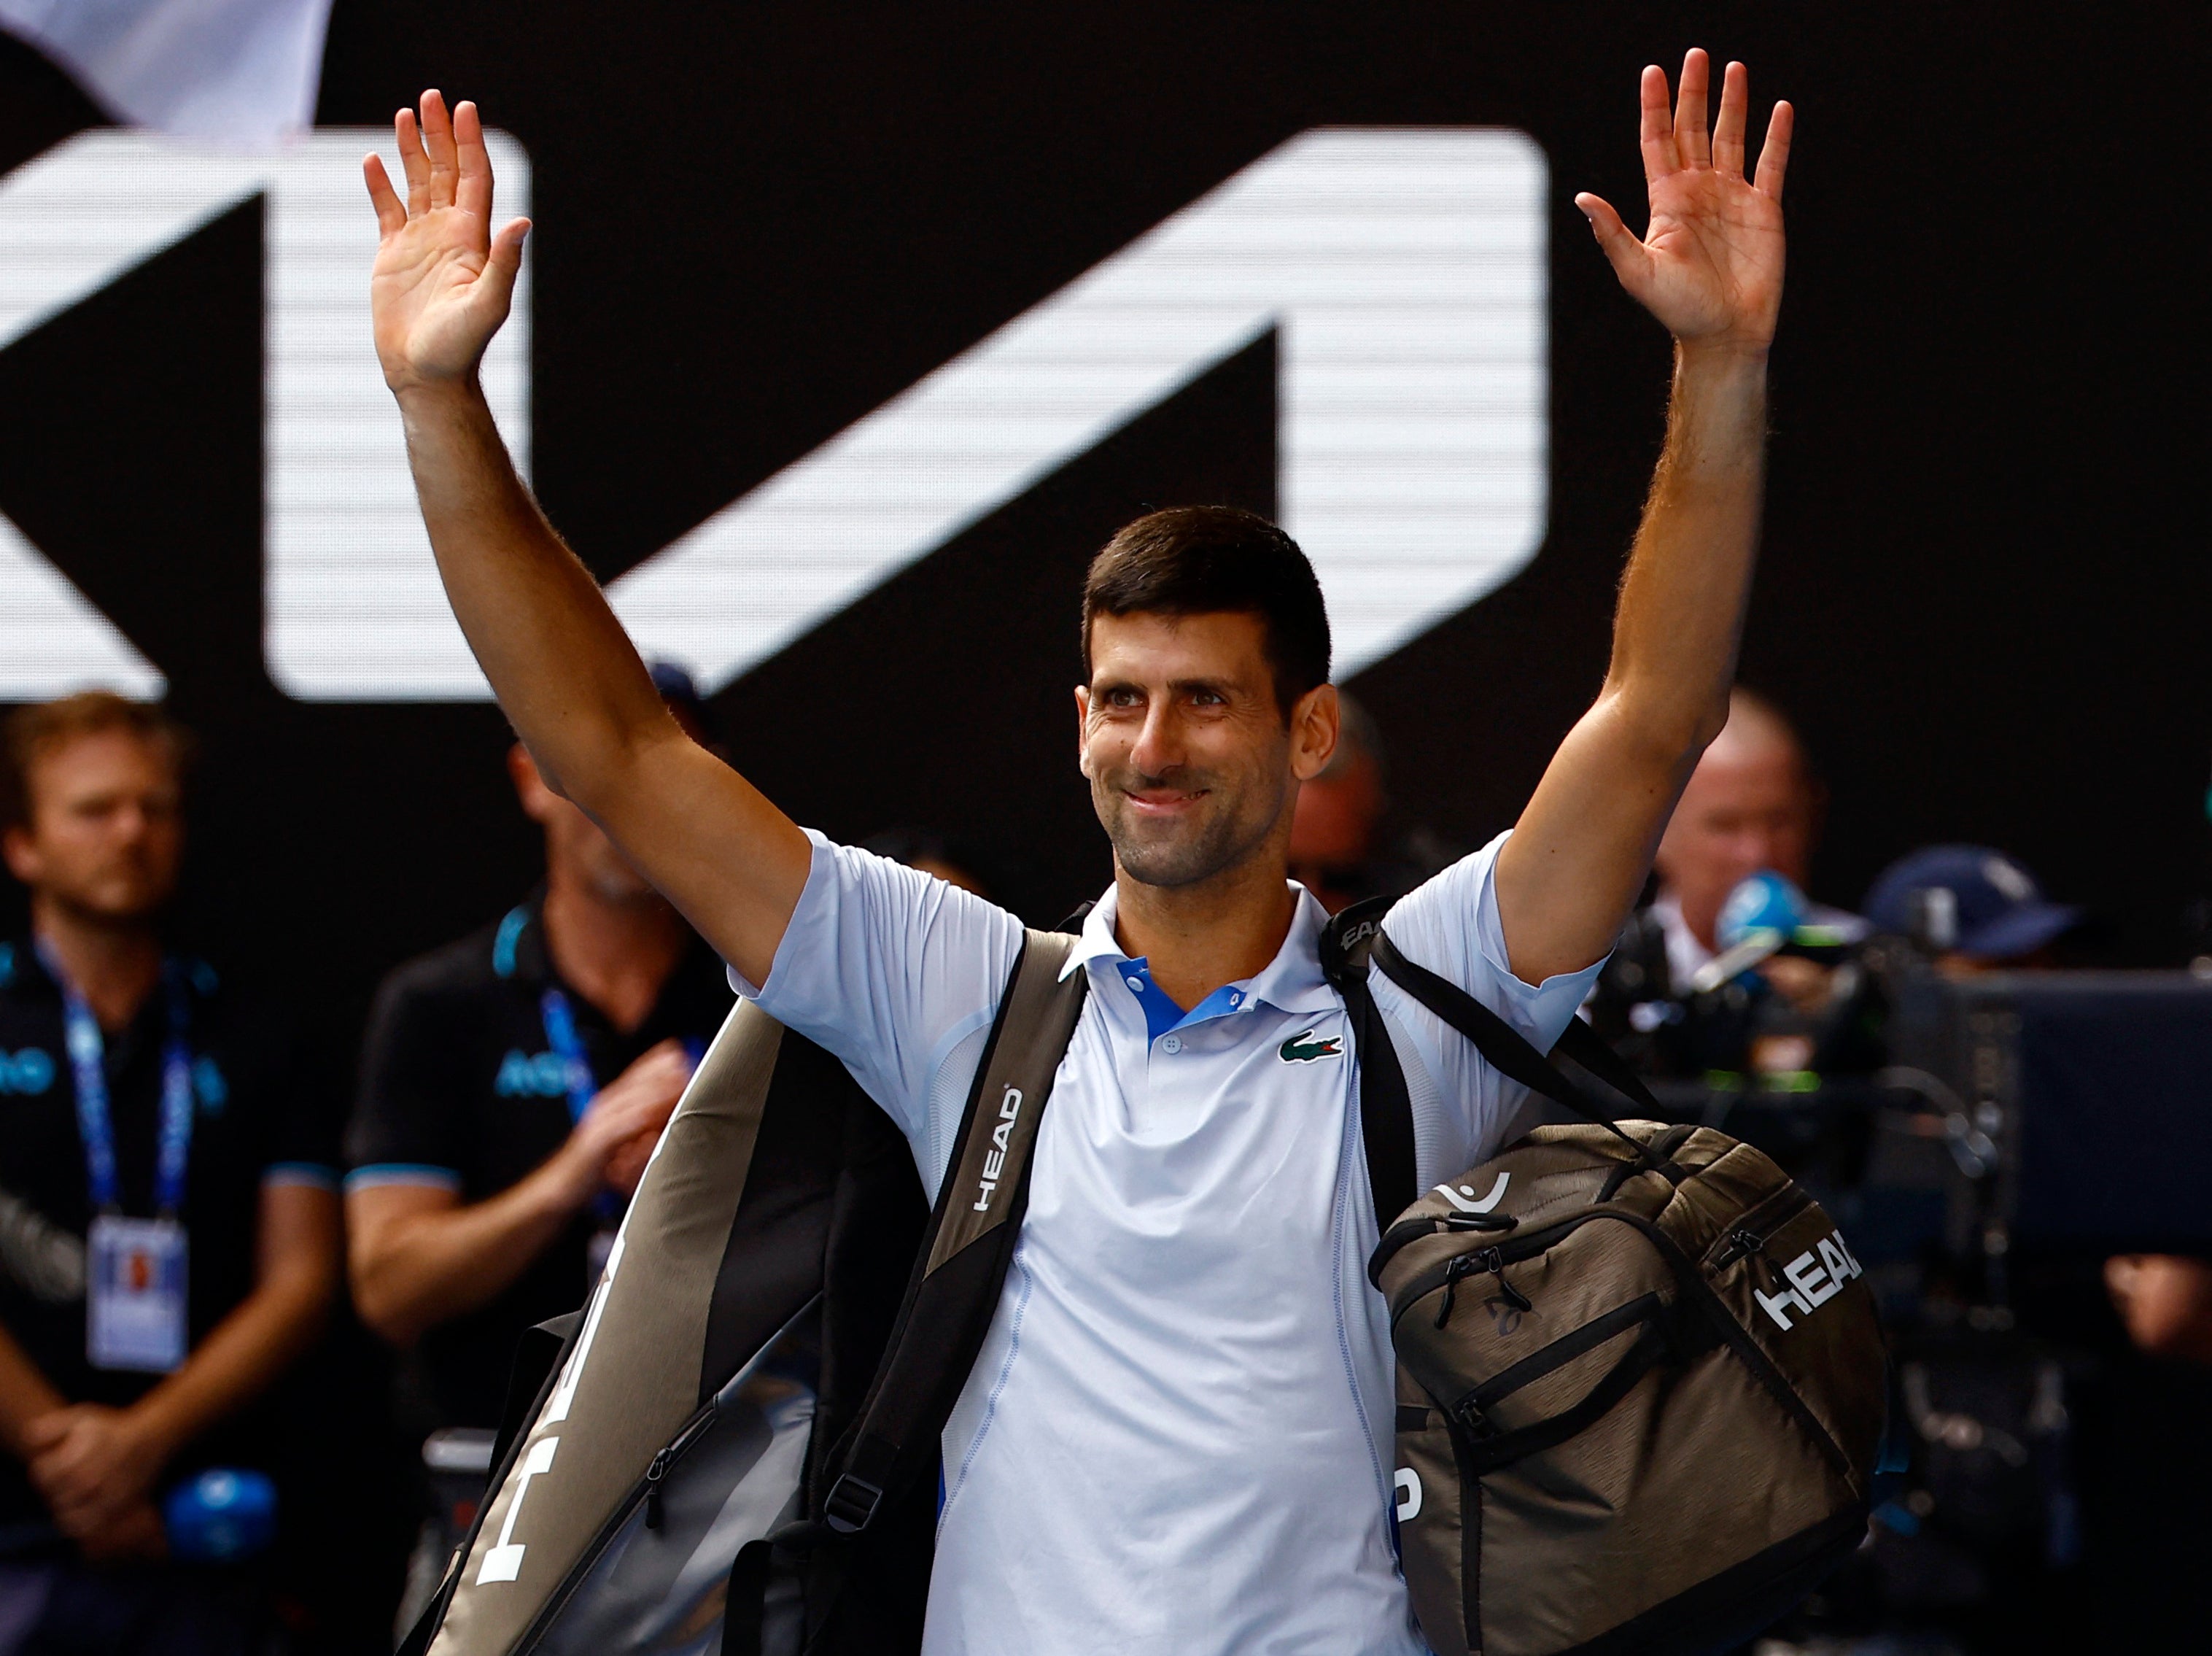 Djokovic departs Melbourne with his winning run now over